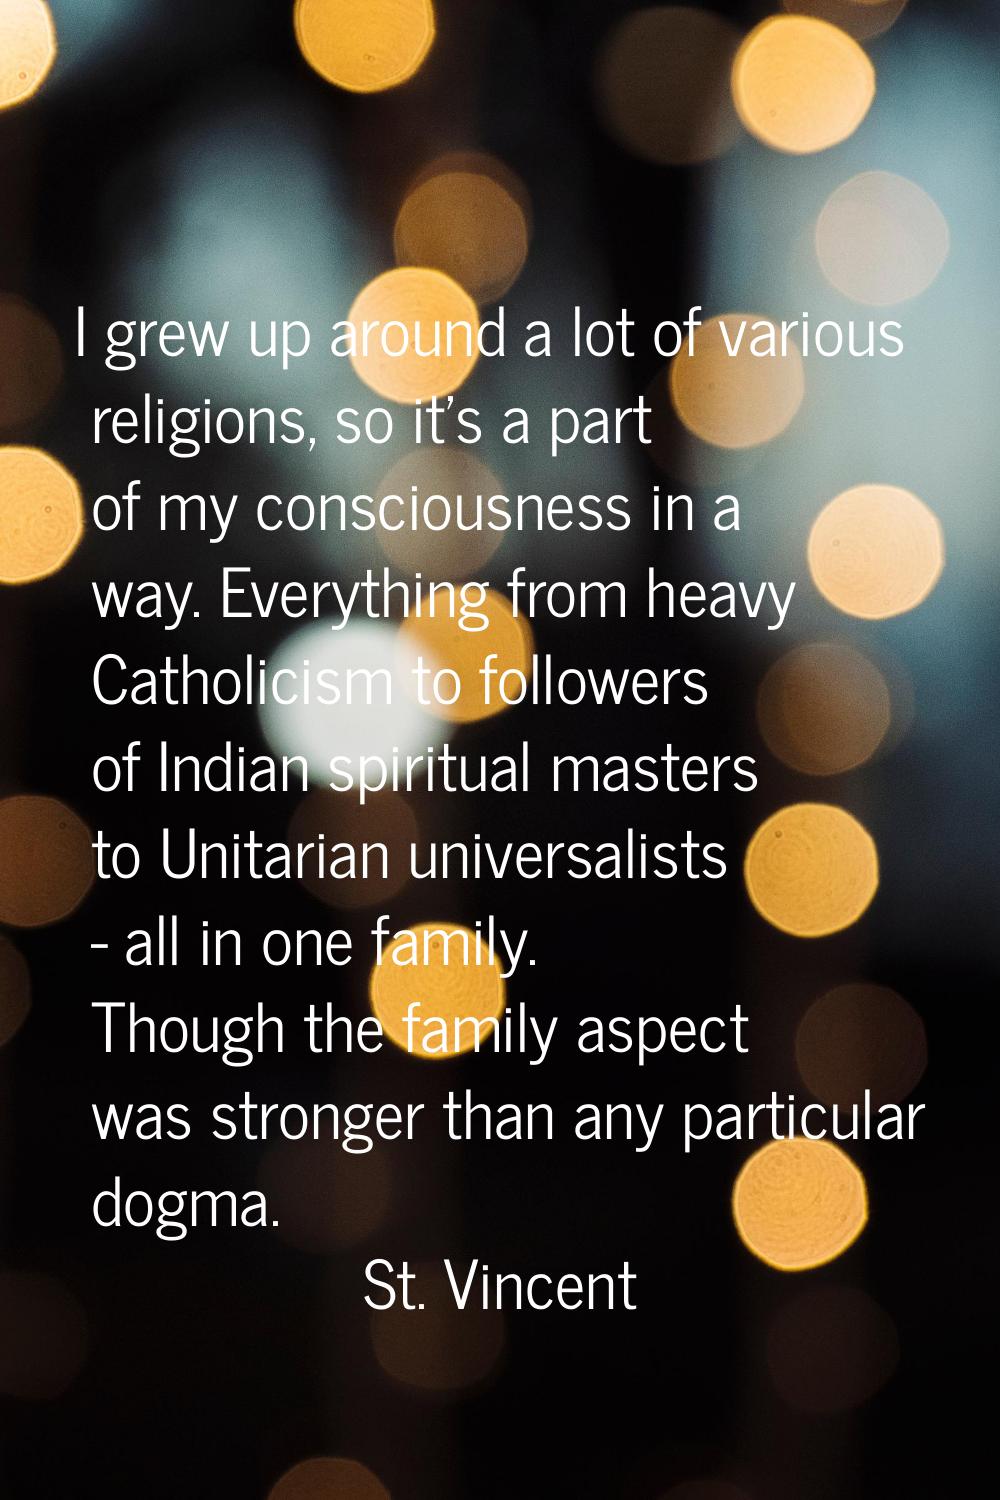 I grew up around a lot of various religions, so it's a part of my consciousness in a way. Everythin